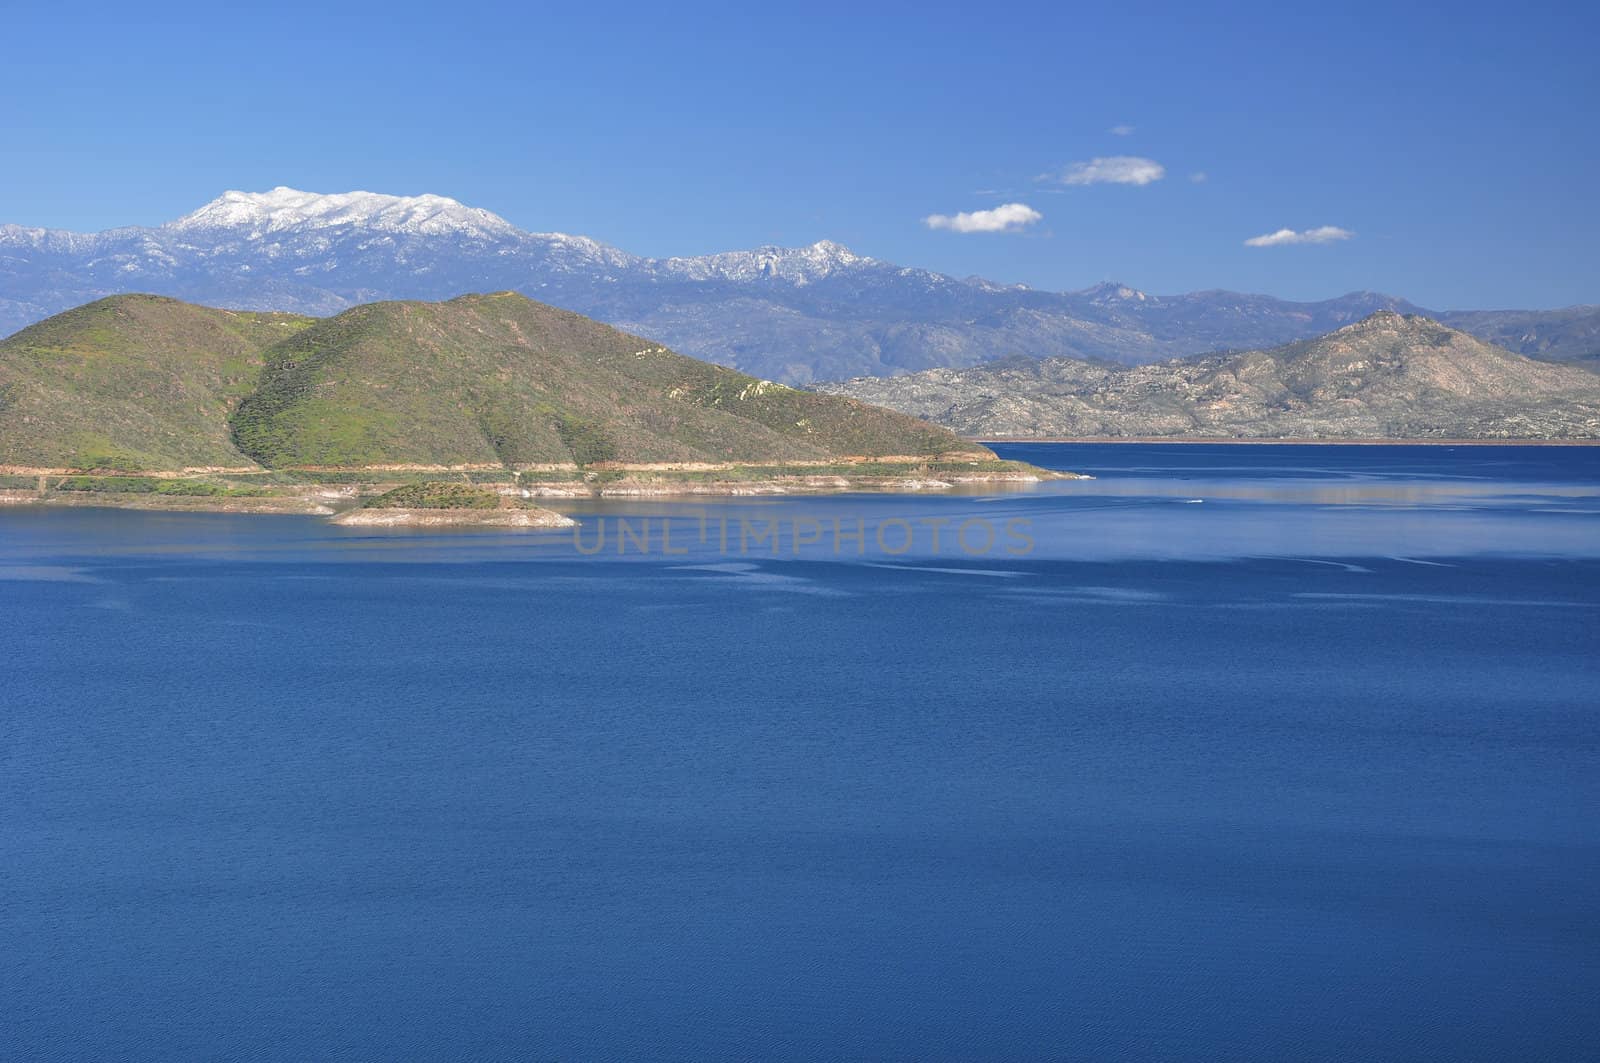 View of Diamond Valley Lake and distant snow-capped Mount San Jacinto. Located near the town of Hemet, California.